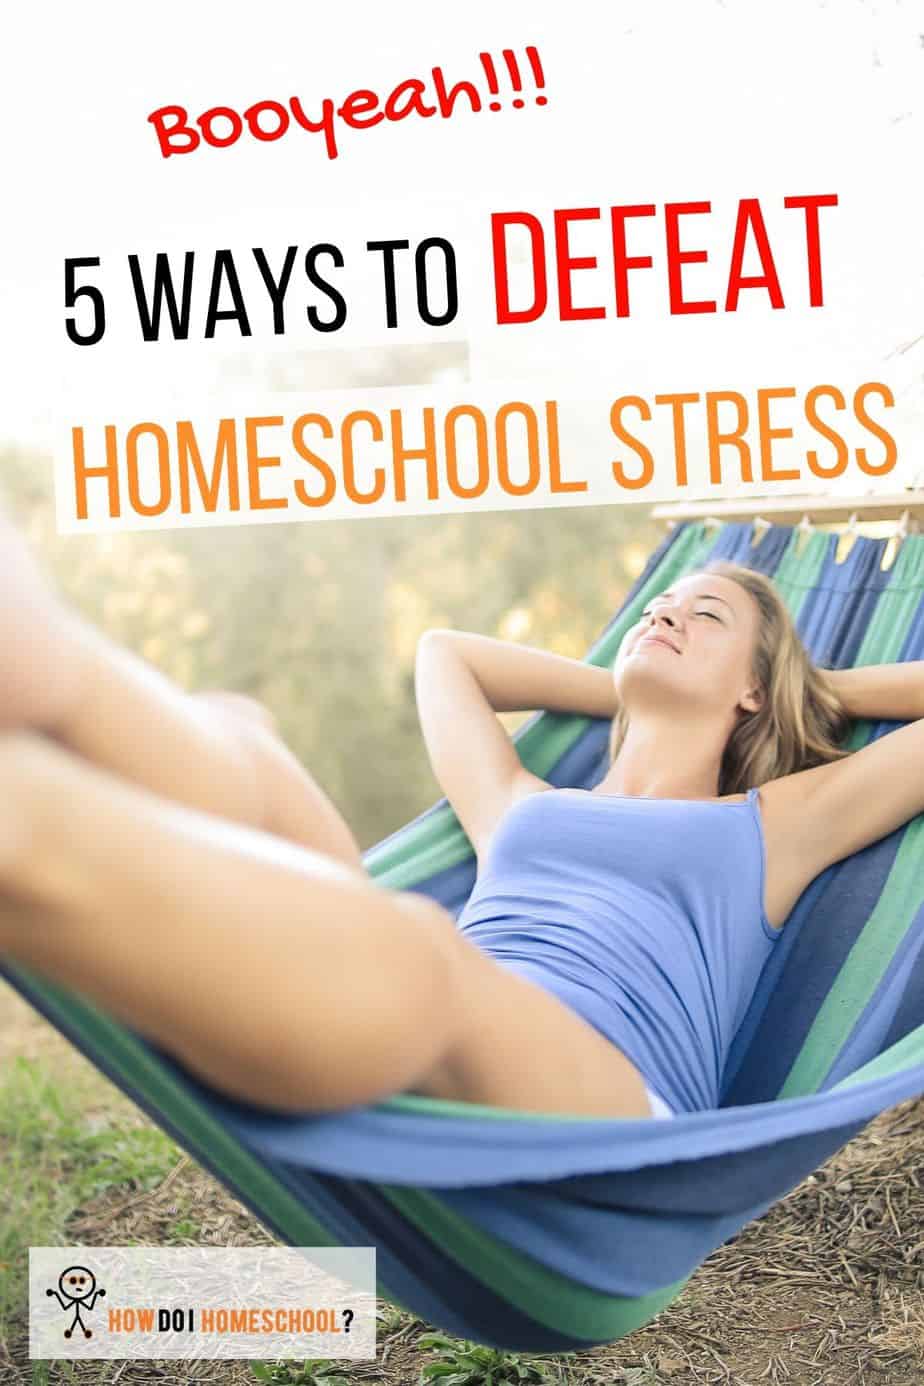 5 Ways to Defeat Homeschool Stress in Parents. We look at different things that cause stress in the home as well as what you can do to avoid it! #homeeducation #homeschooltips